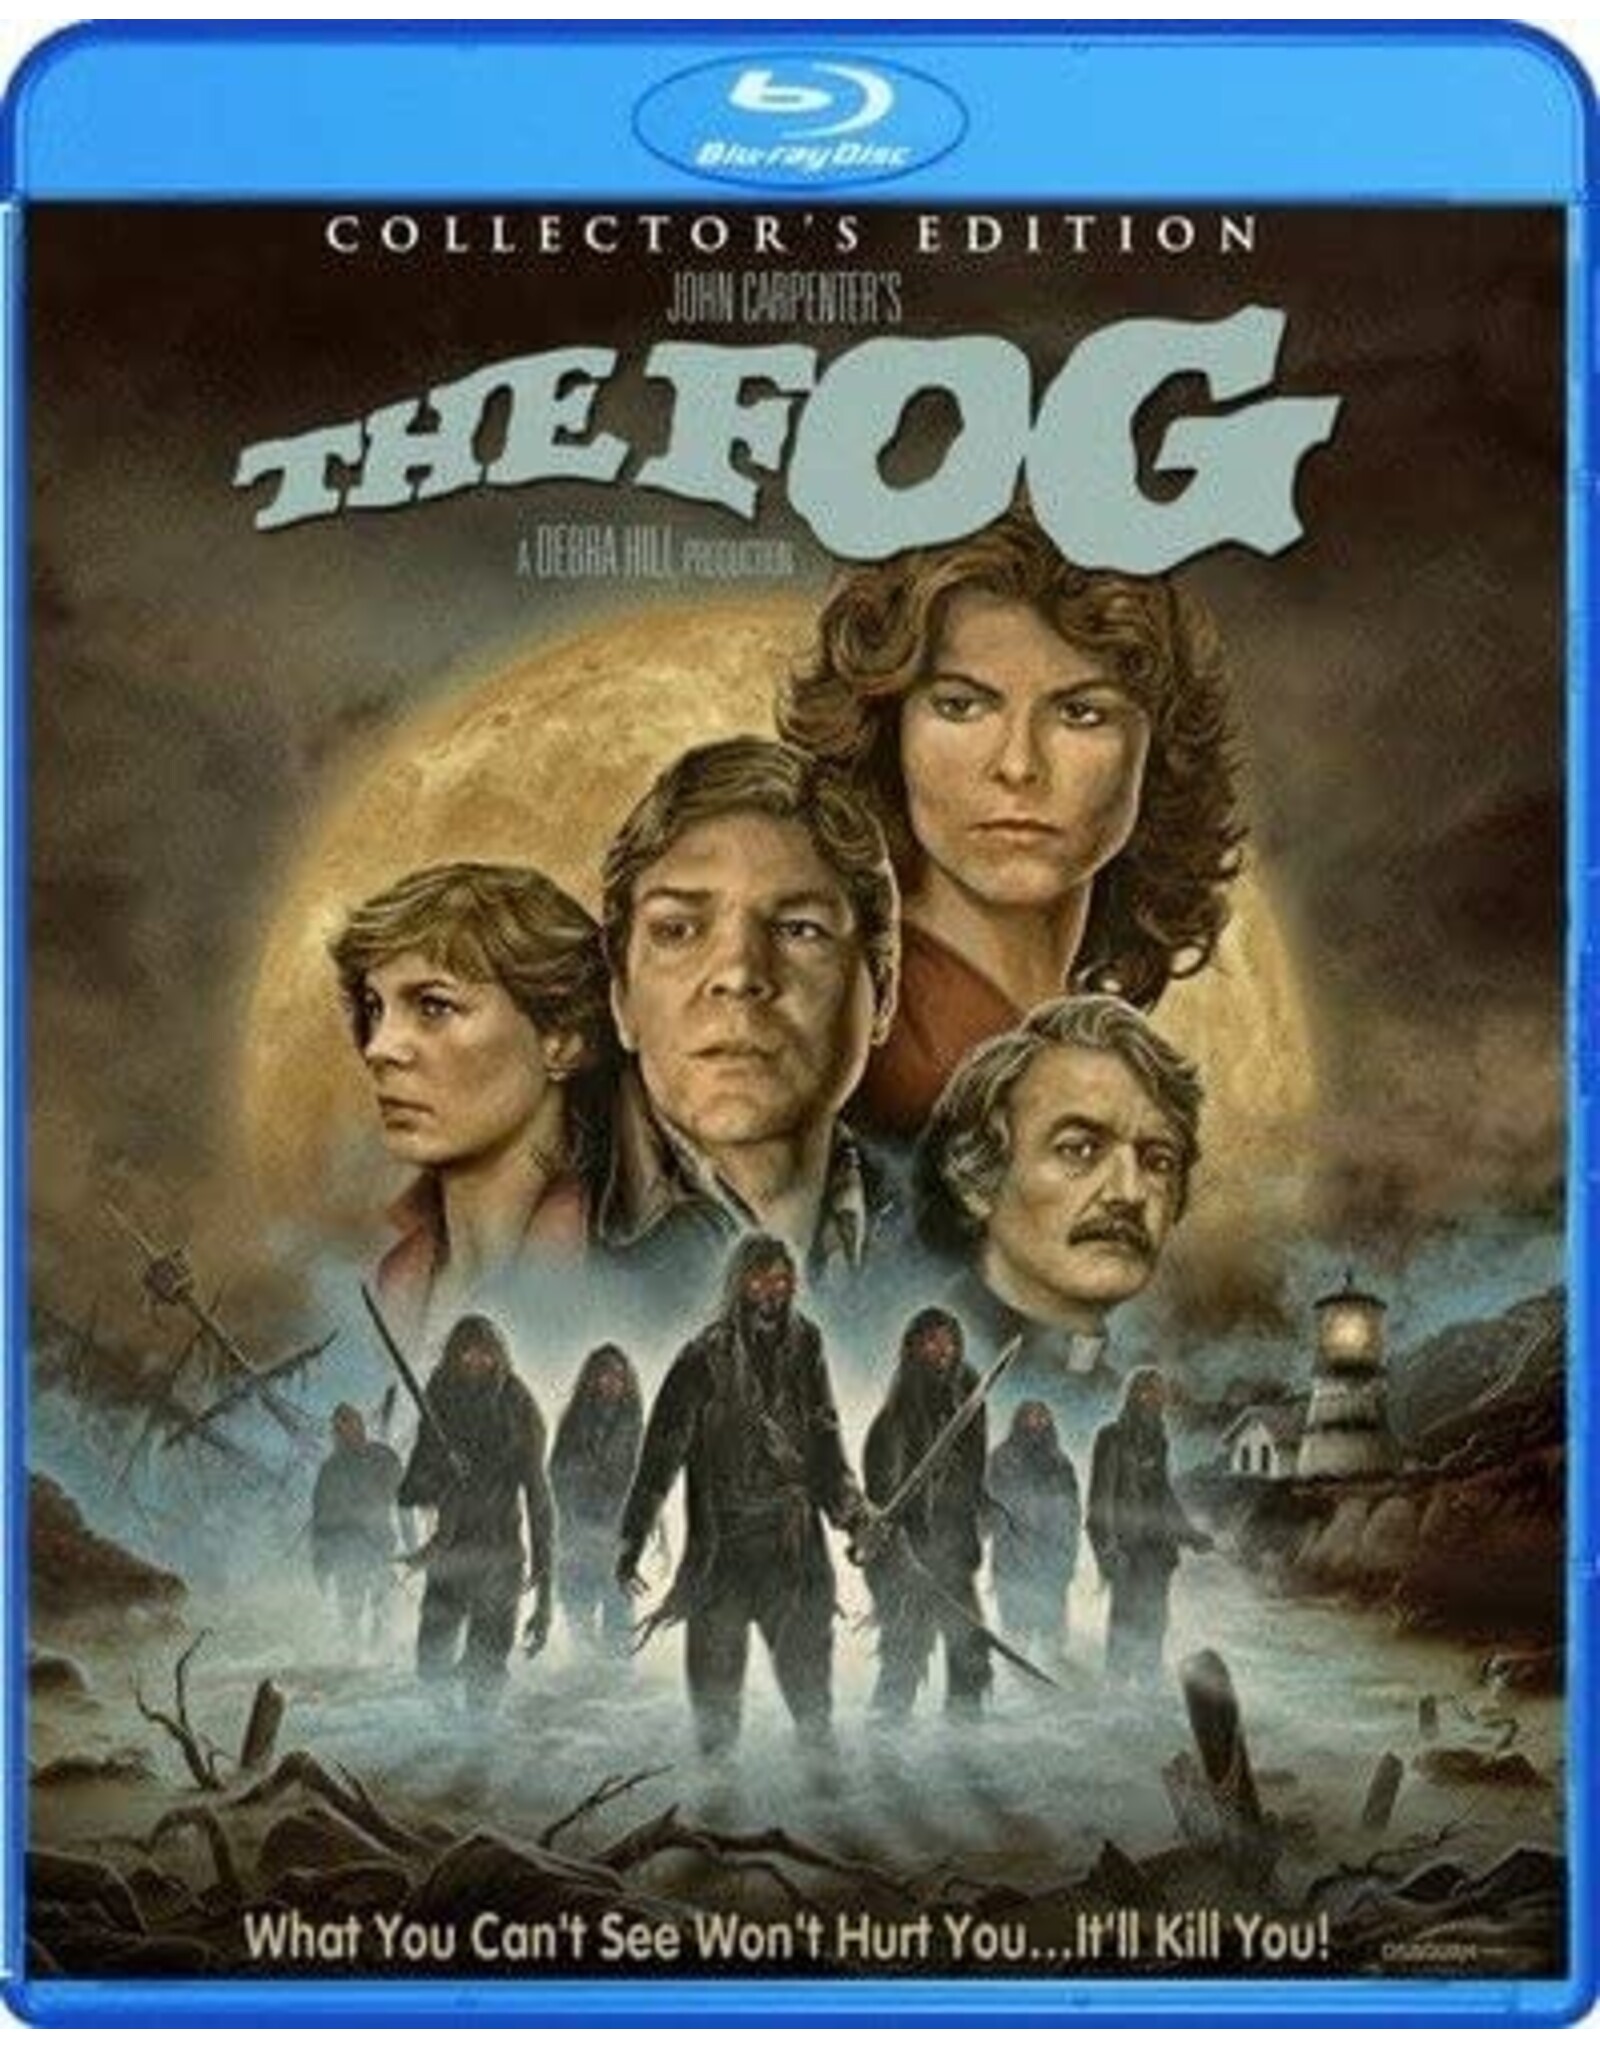 Horror Fog, The Collector's Edition 1980 - Scream Factory (Used)